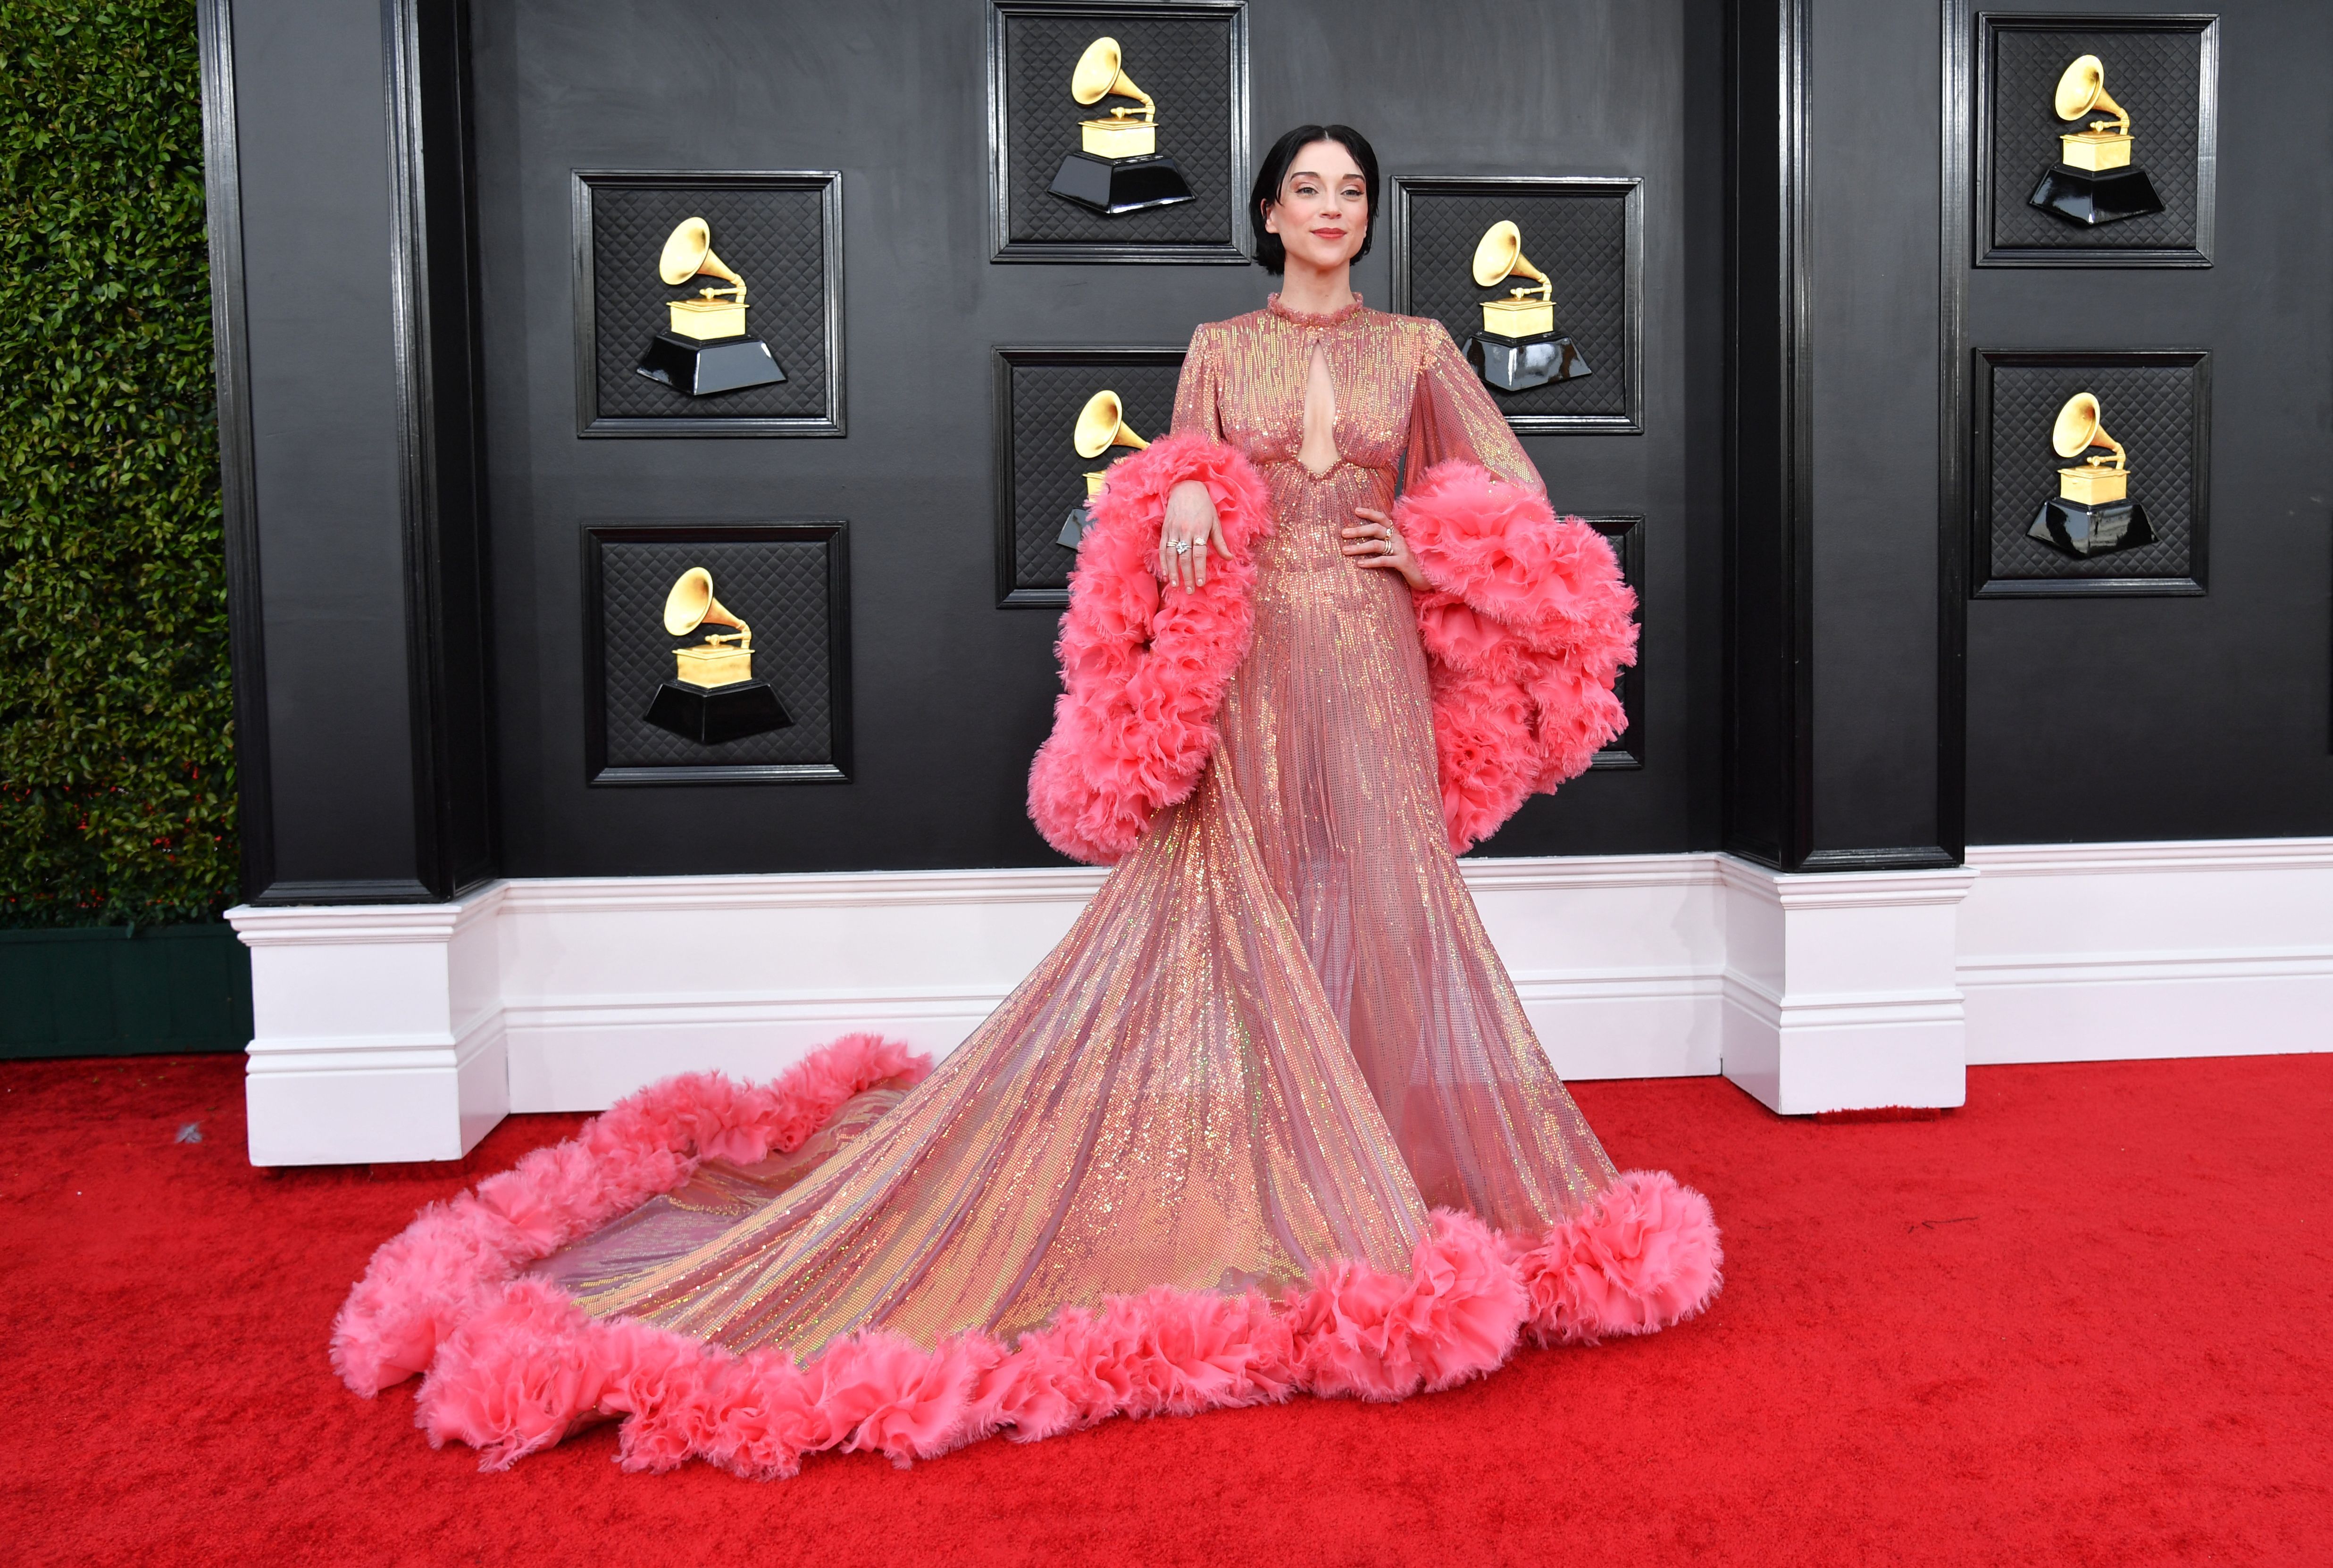 The Best Dressed Stars at the 64th Annual Grammy Awards 2022